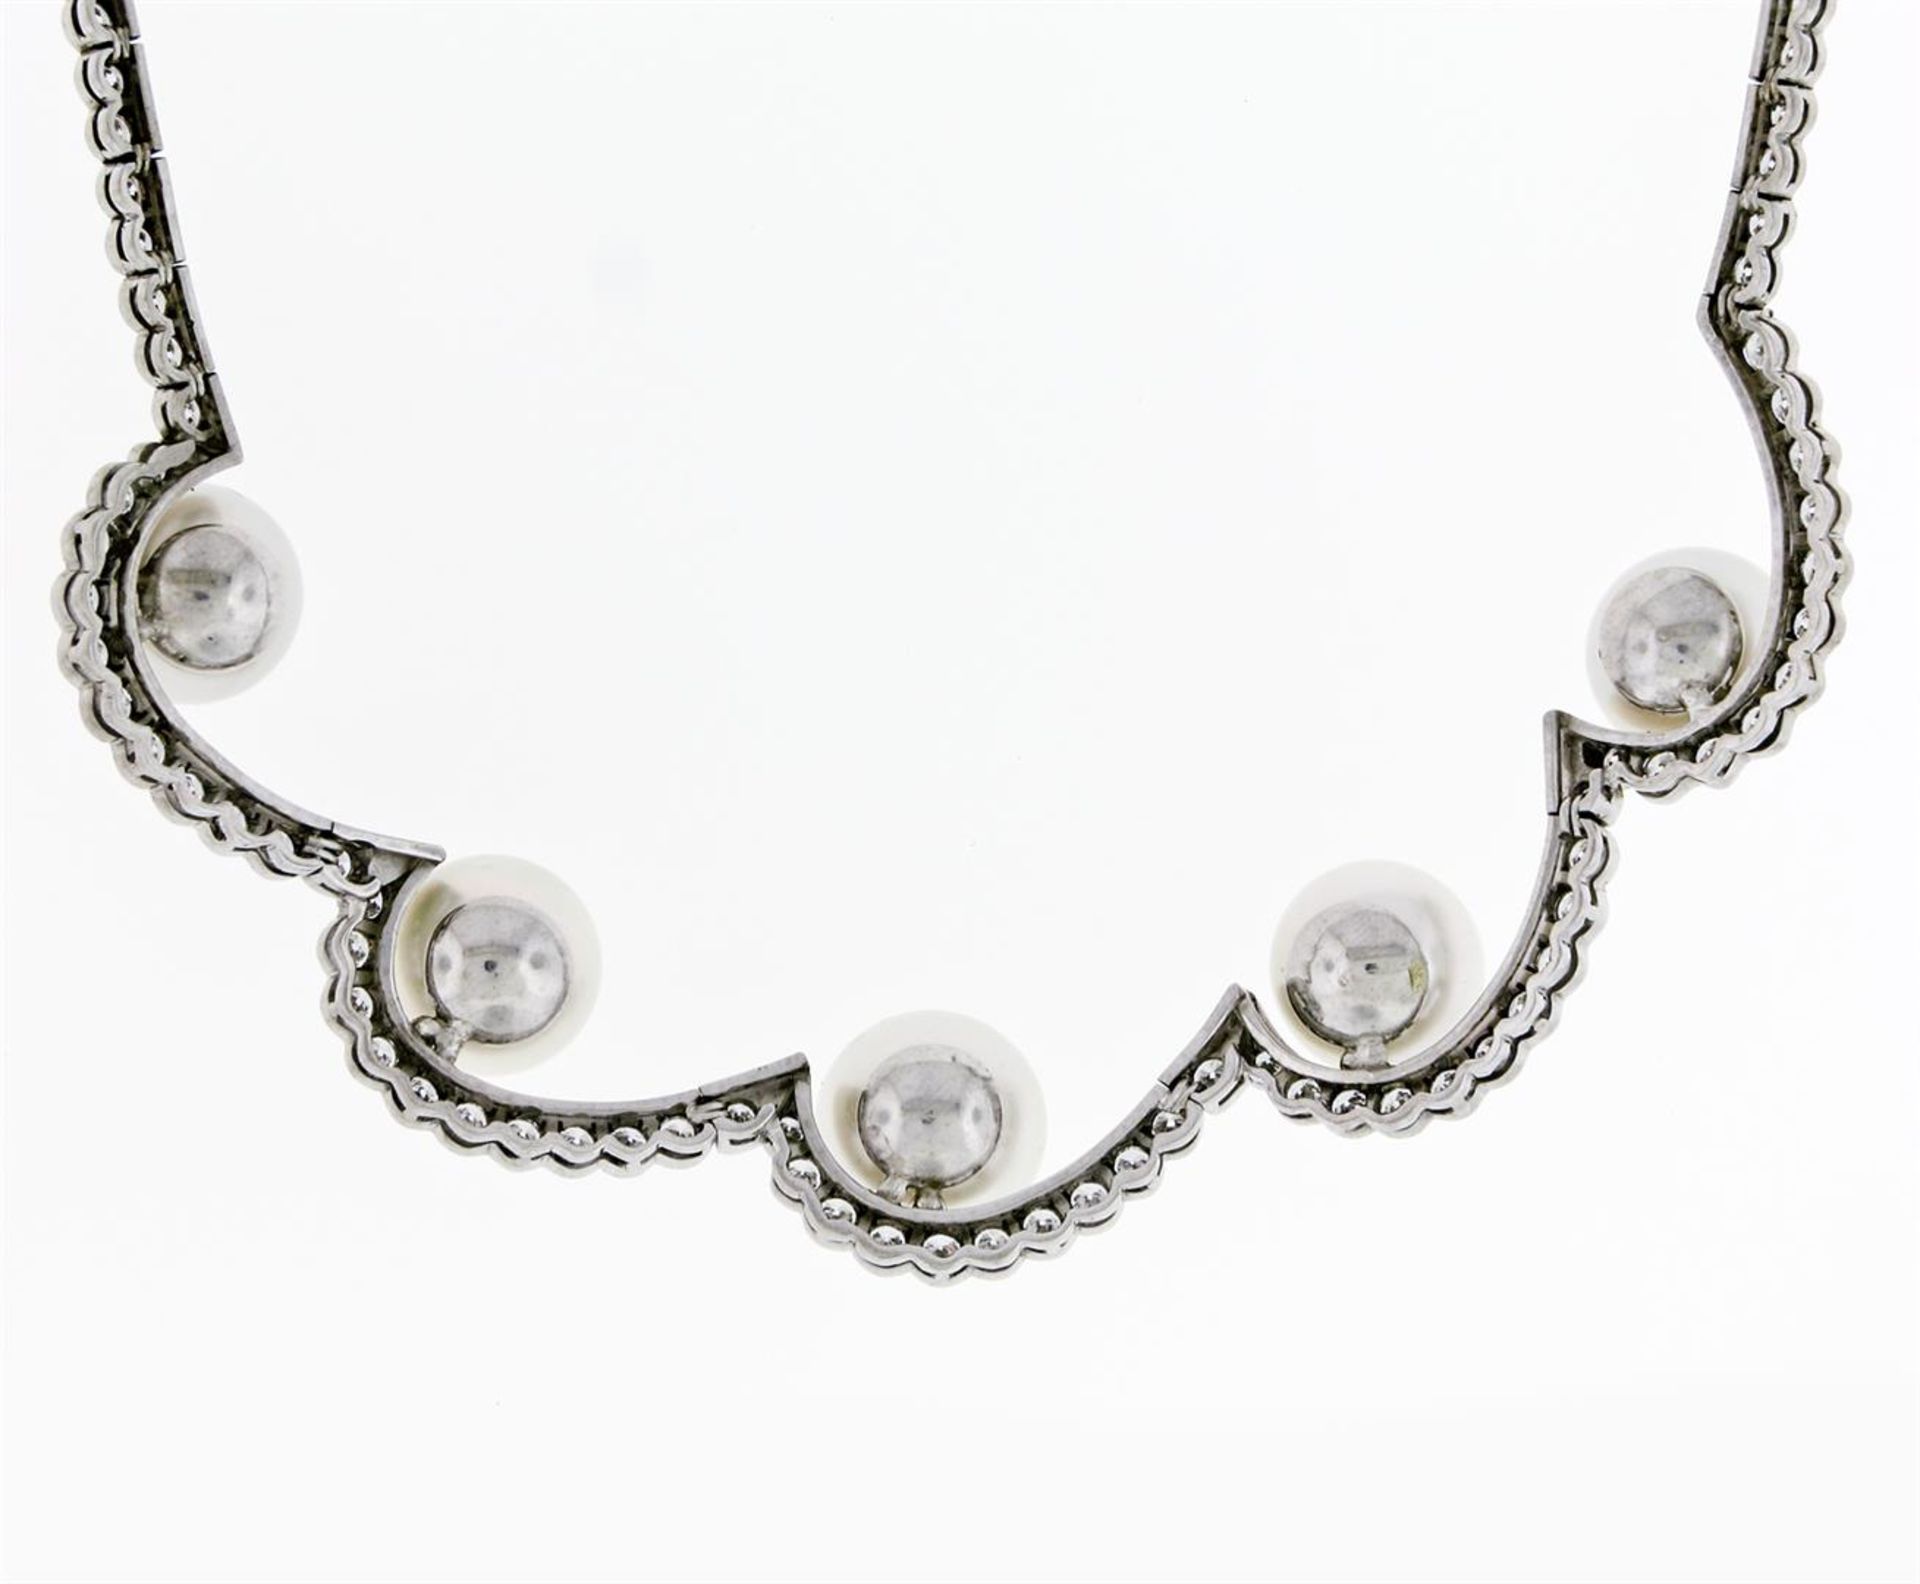 Platinum 10.25ctw Diamond & Floating South Sea Pearl Statement Necklace - Image 7 of 9